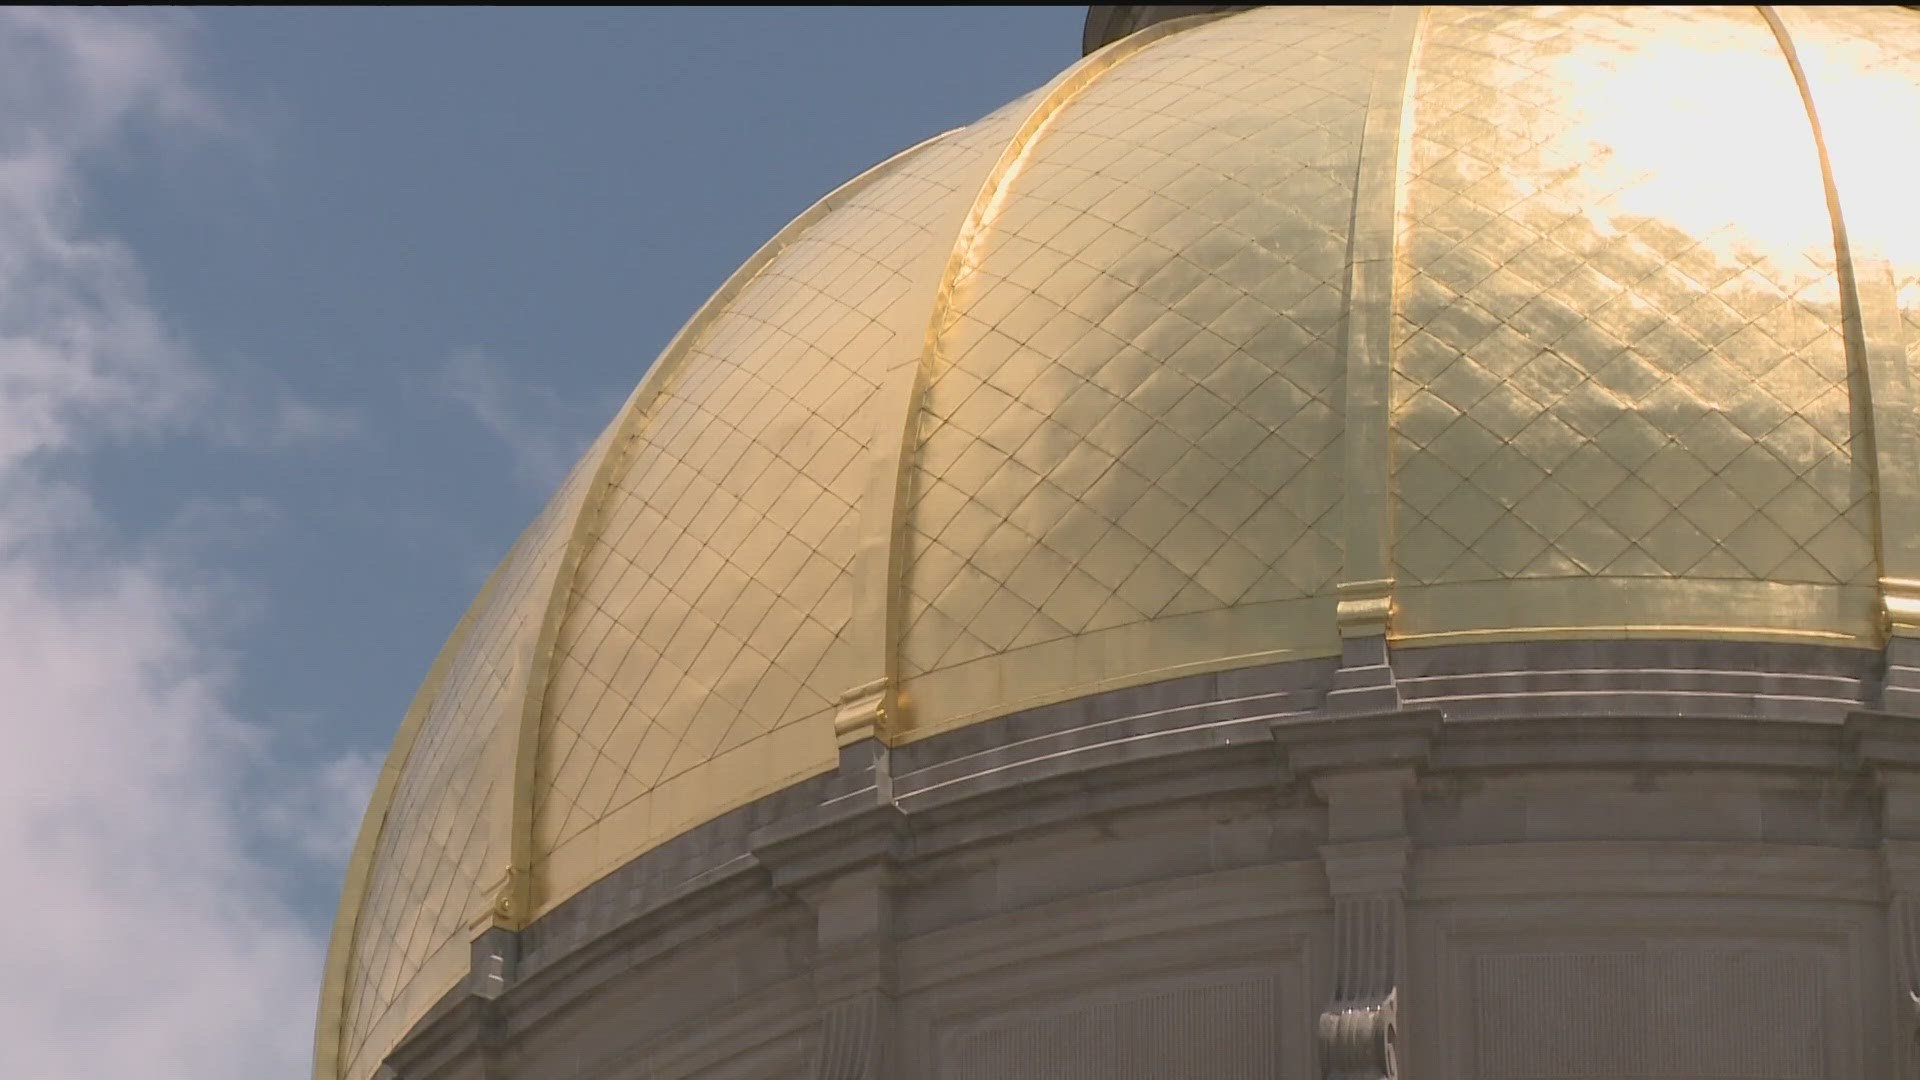 A bill defining antisemitism is moving forward in the state legislature after it stalled last year.